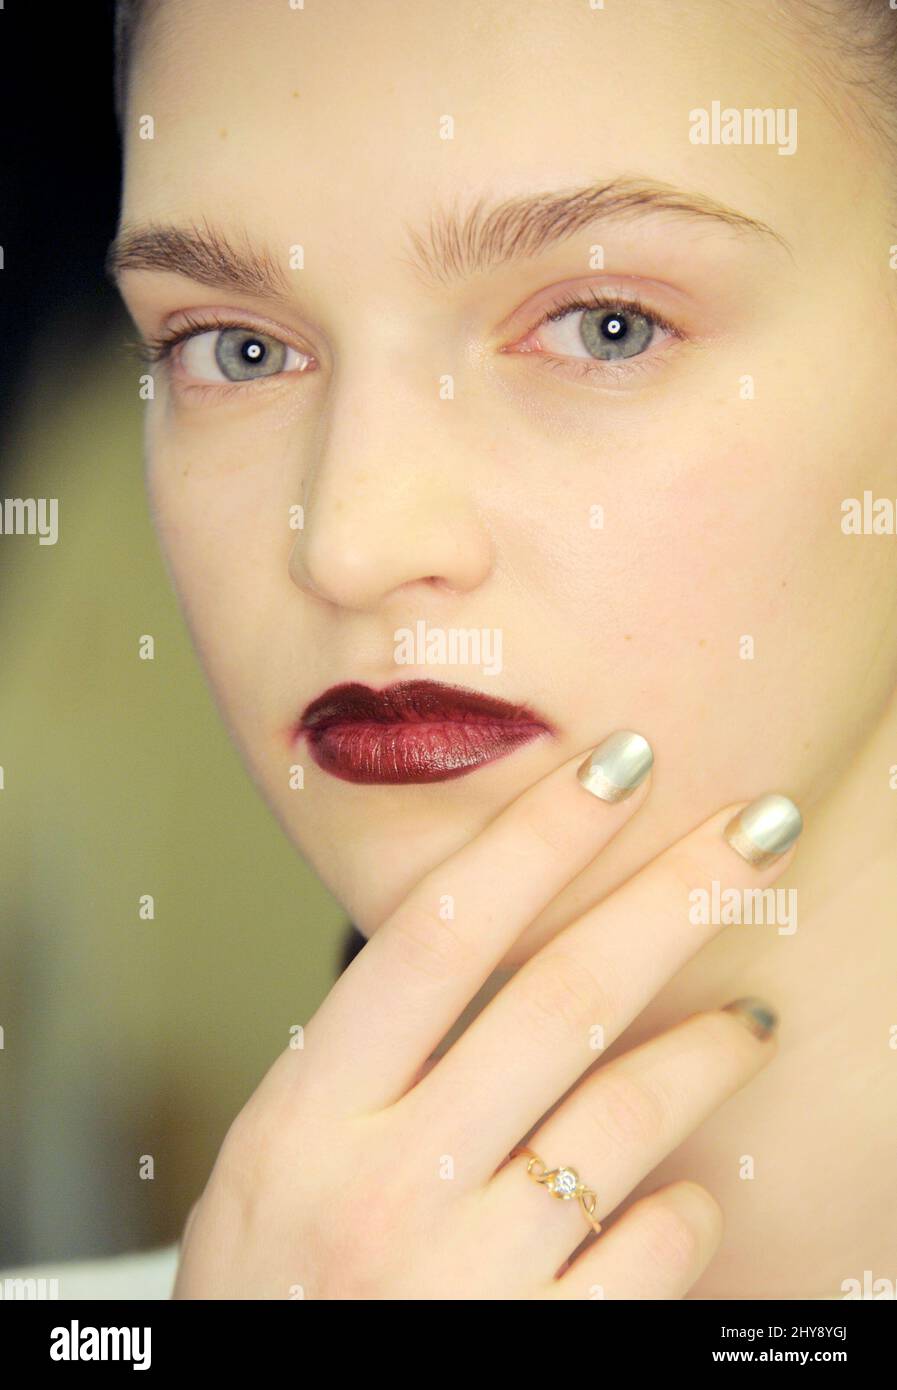 Model with Morgan Taylor Nails attending the Creatures of the Wind Fall 2016 Collection held at the Masonic Lodge in New York. Stock Photo